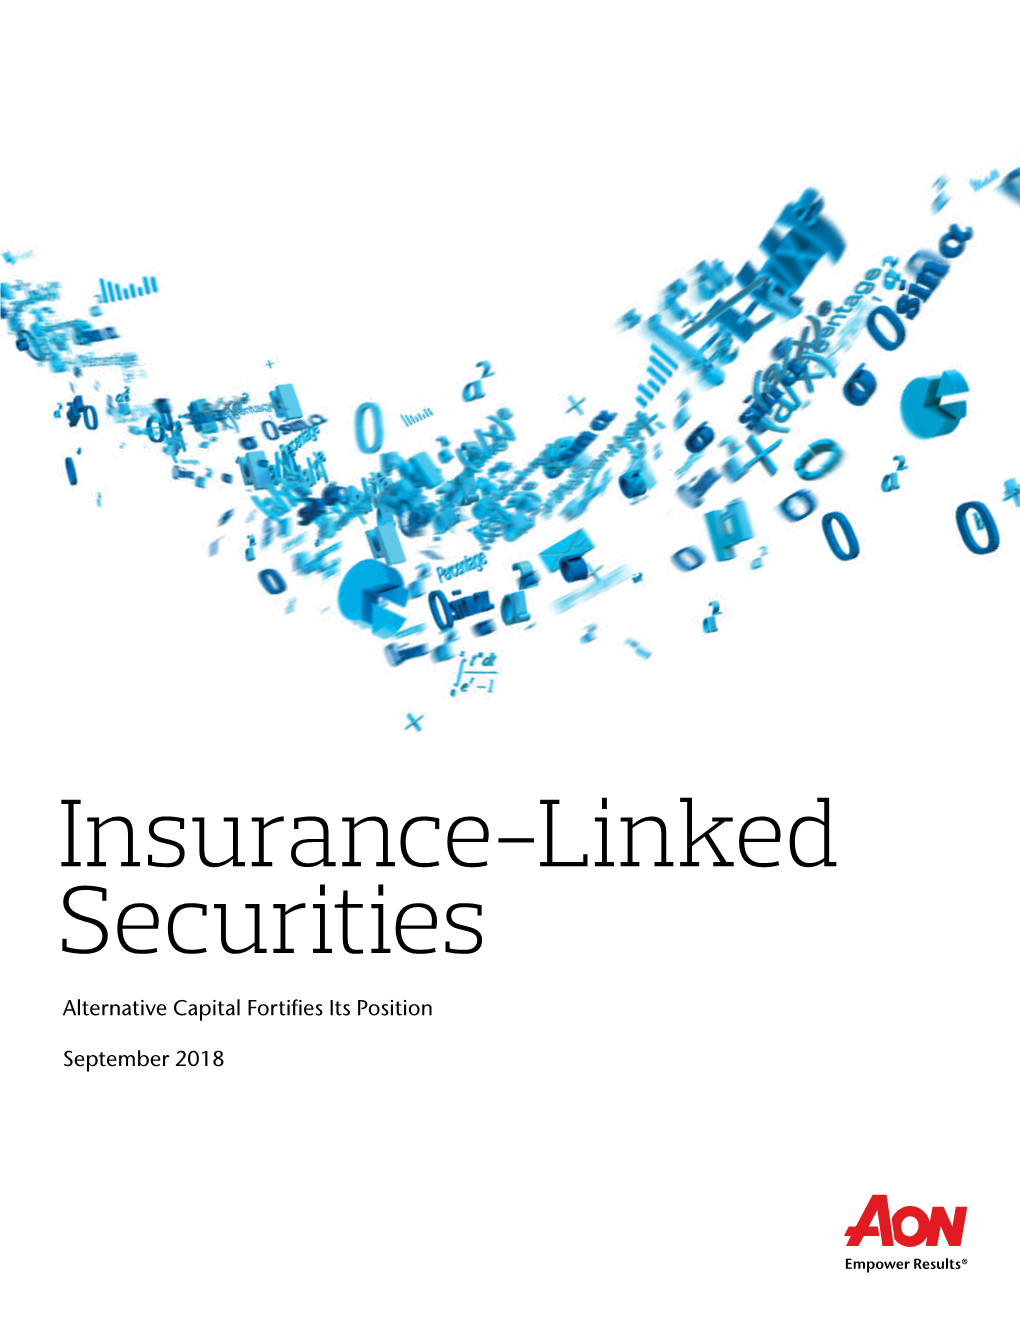 Insurance-Linked Securities Alternative Capital Fortifies Its Position